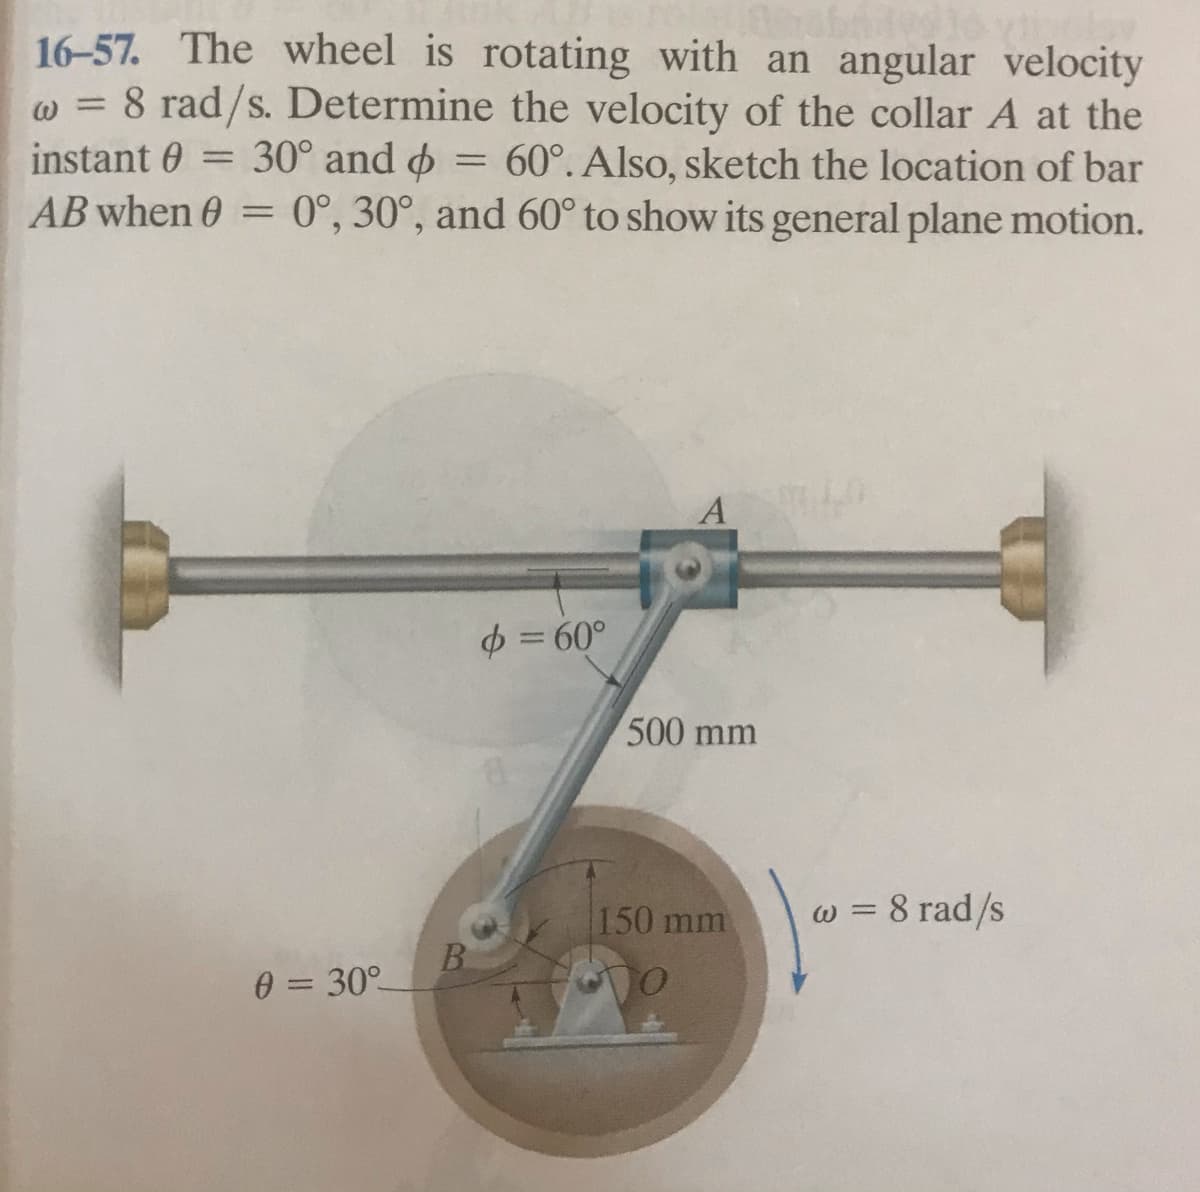 16-57. The wheel is rotating with an angular velocity
w = 8 rad/s. Determine the velocity of the collar A at the
instant 0 = 30° and o = 60°. Also, sketch the location of bar
AB when 0 = 0°, 30°, and 60° to show its general plane motion.
ω
$ = 60°
500 mm
150 mm
w = 8 rad/s
B.
0 = 30°
